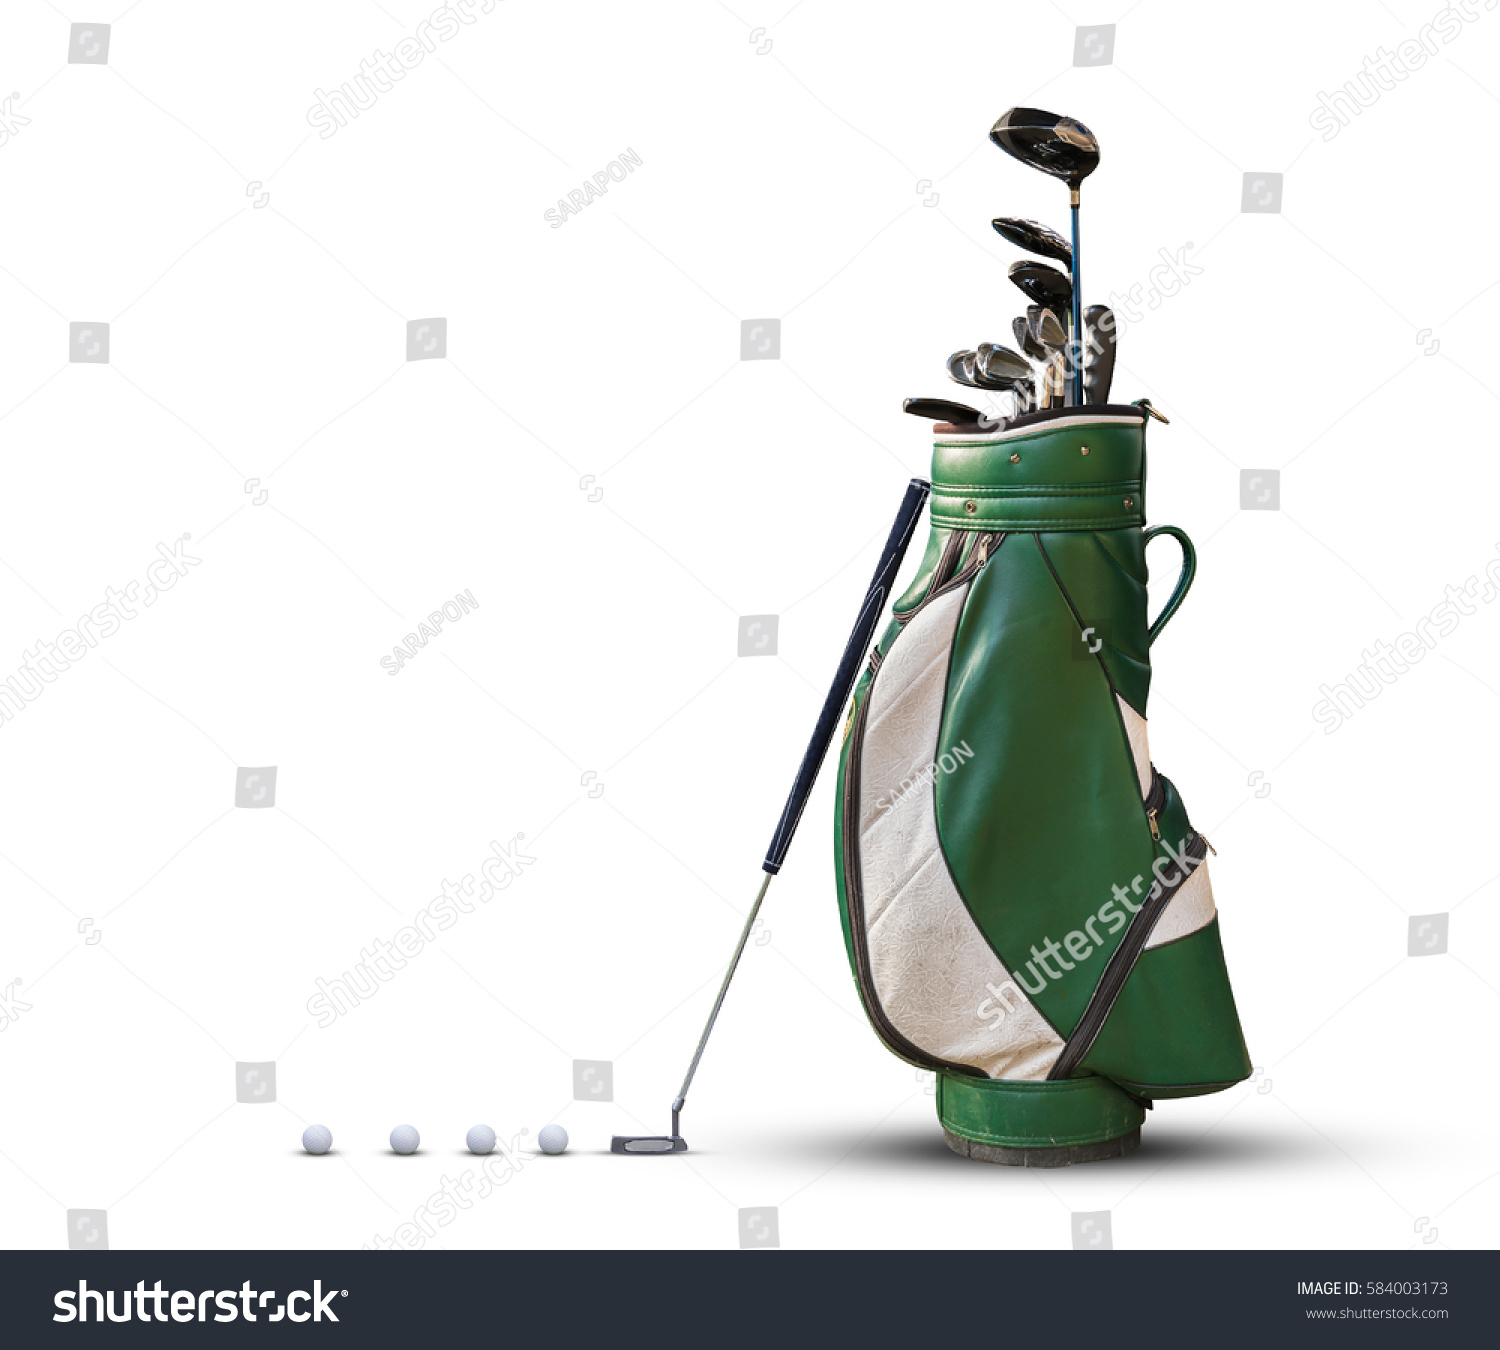 Golf equipment golf ball and golf bag isolated on white background. #584003173